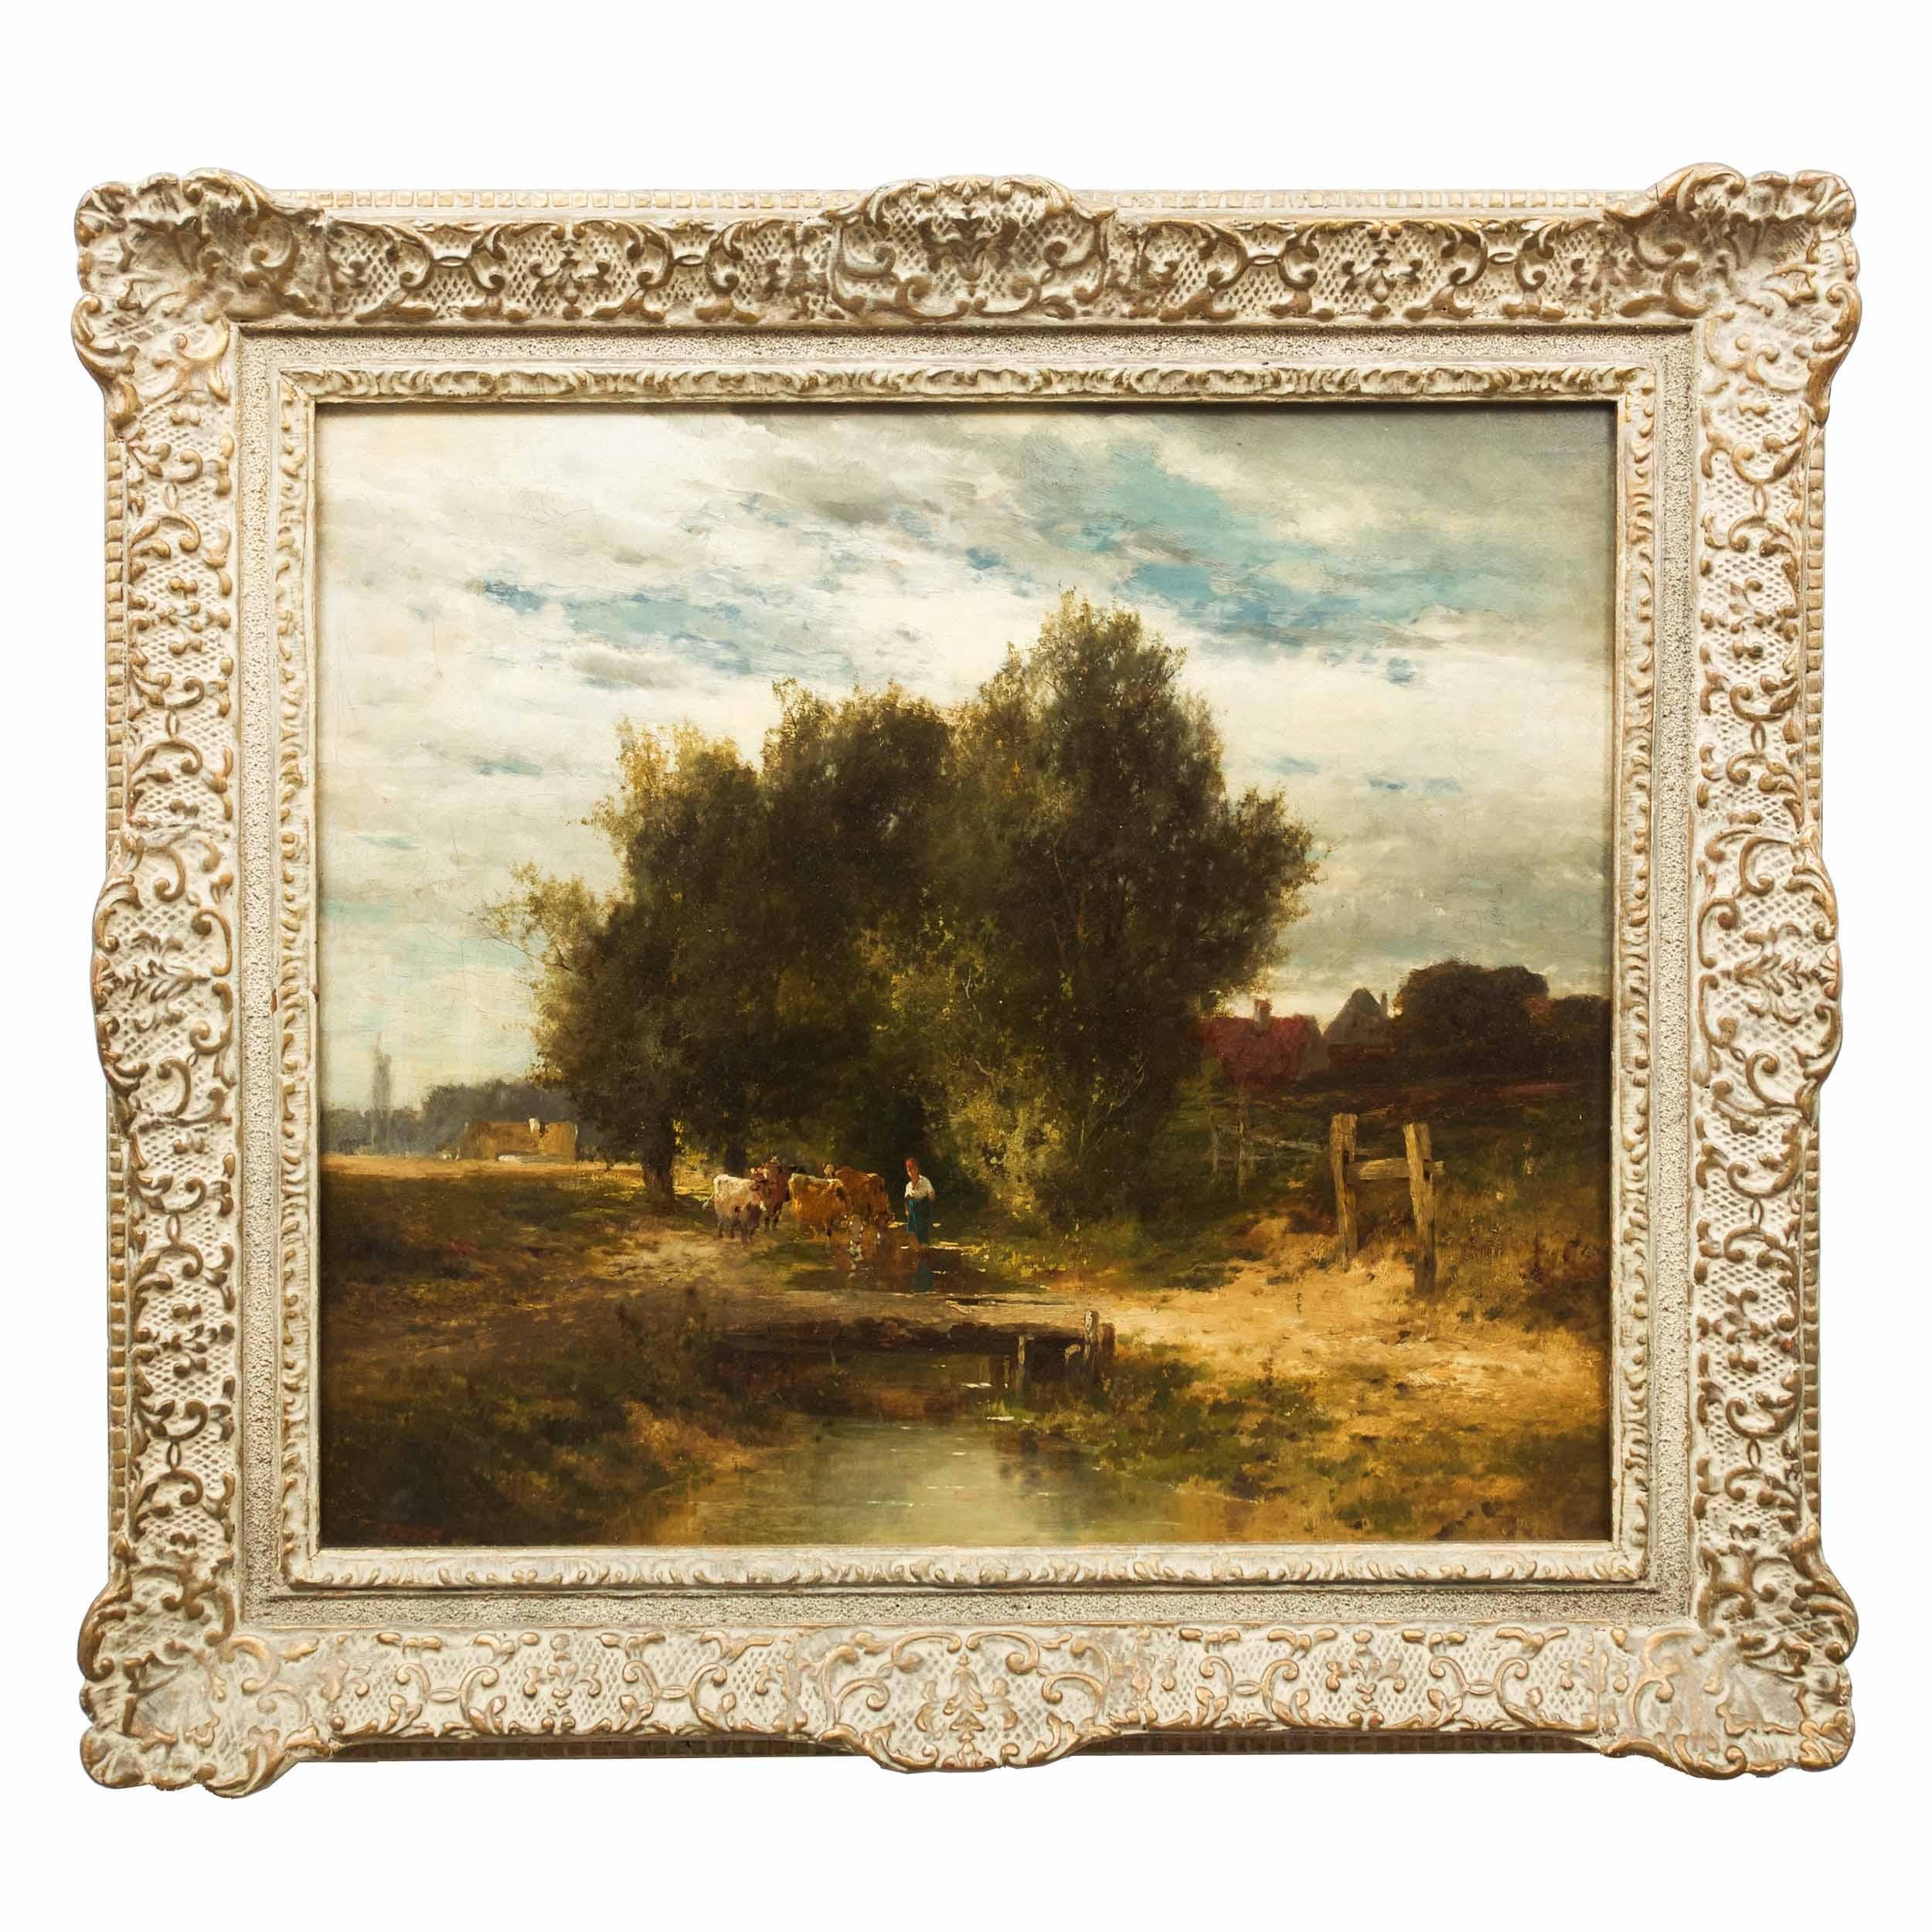 A lovely Barbizon painting from the 19th century, it captures a young woman as she leads a group of cattle to the brook outside of town under the shade of a collection of trees. The scene is complex with a fine use of the full range of colors to